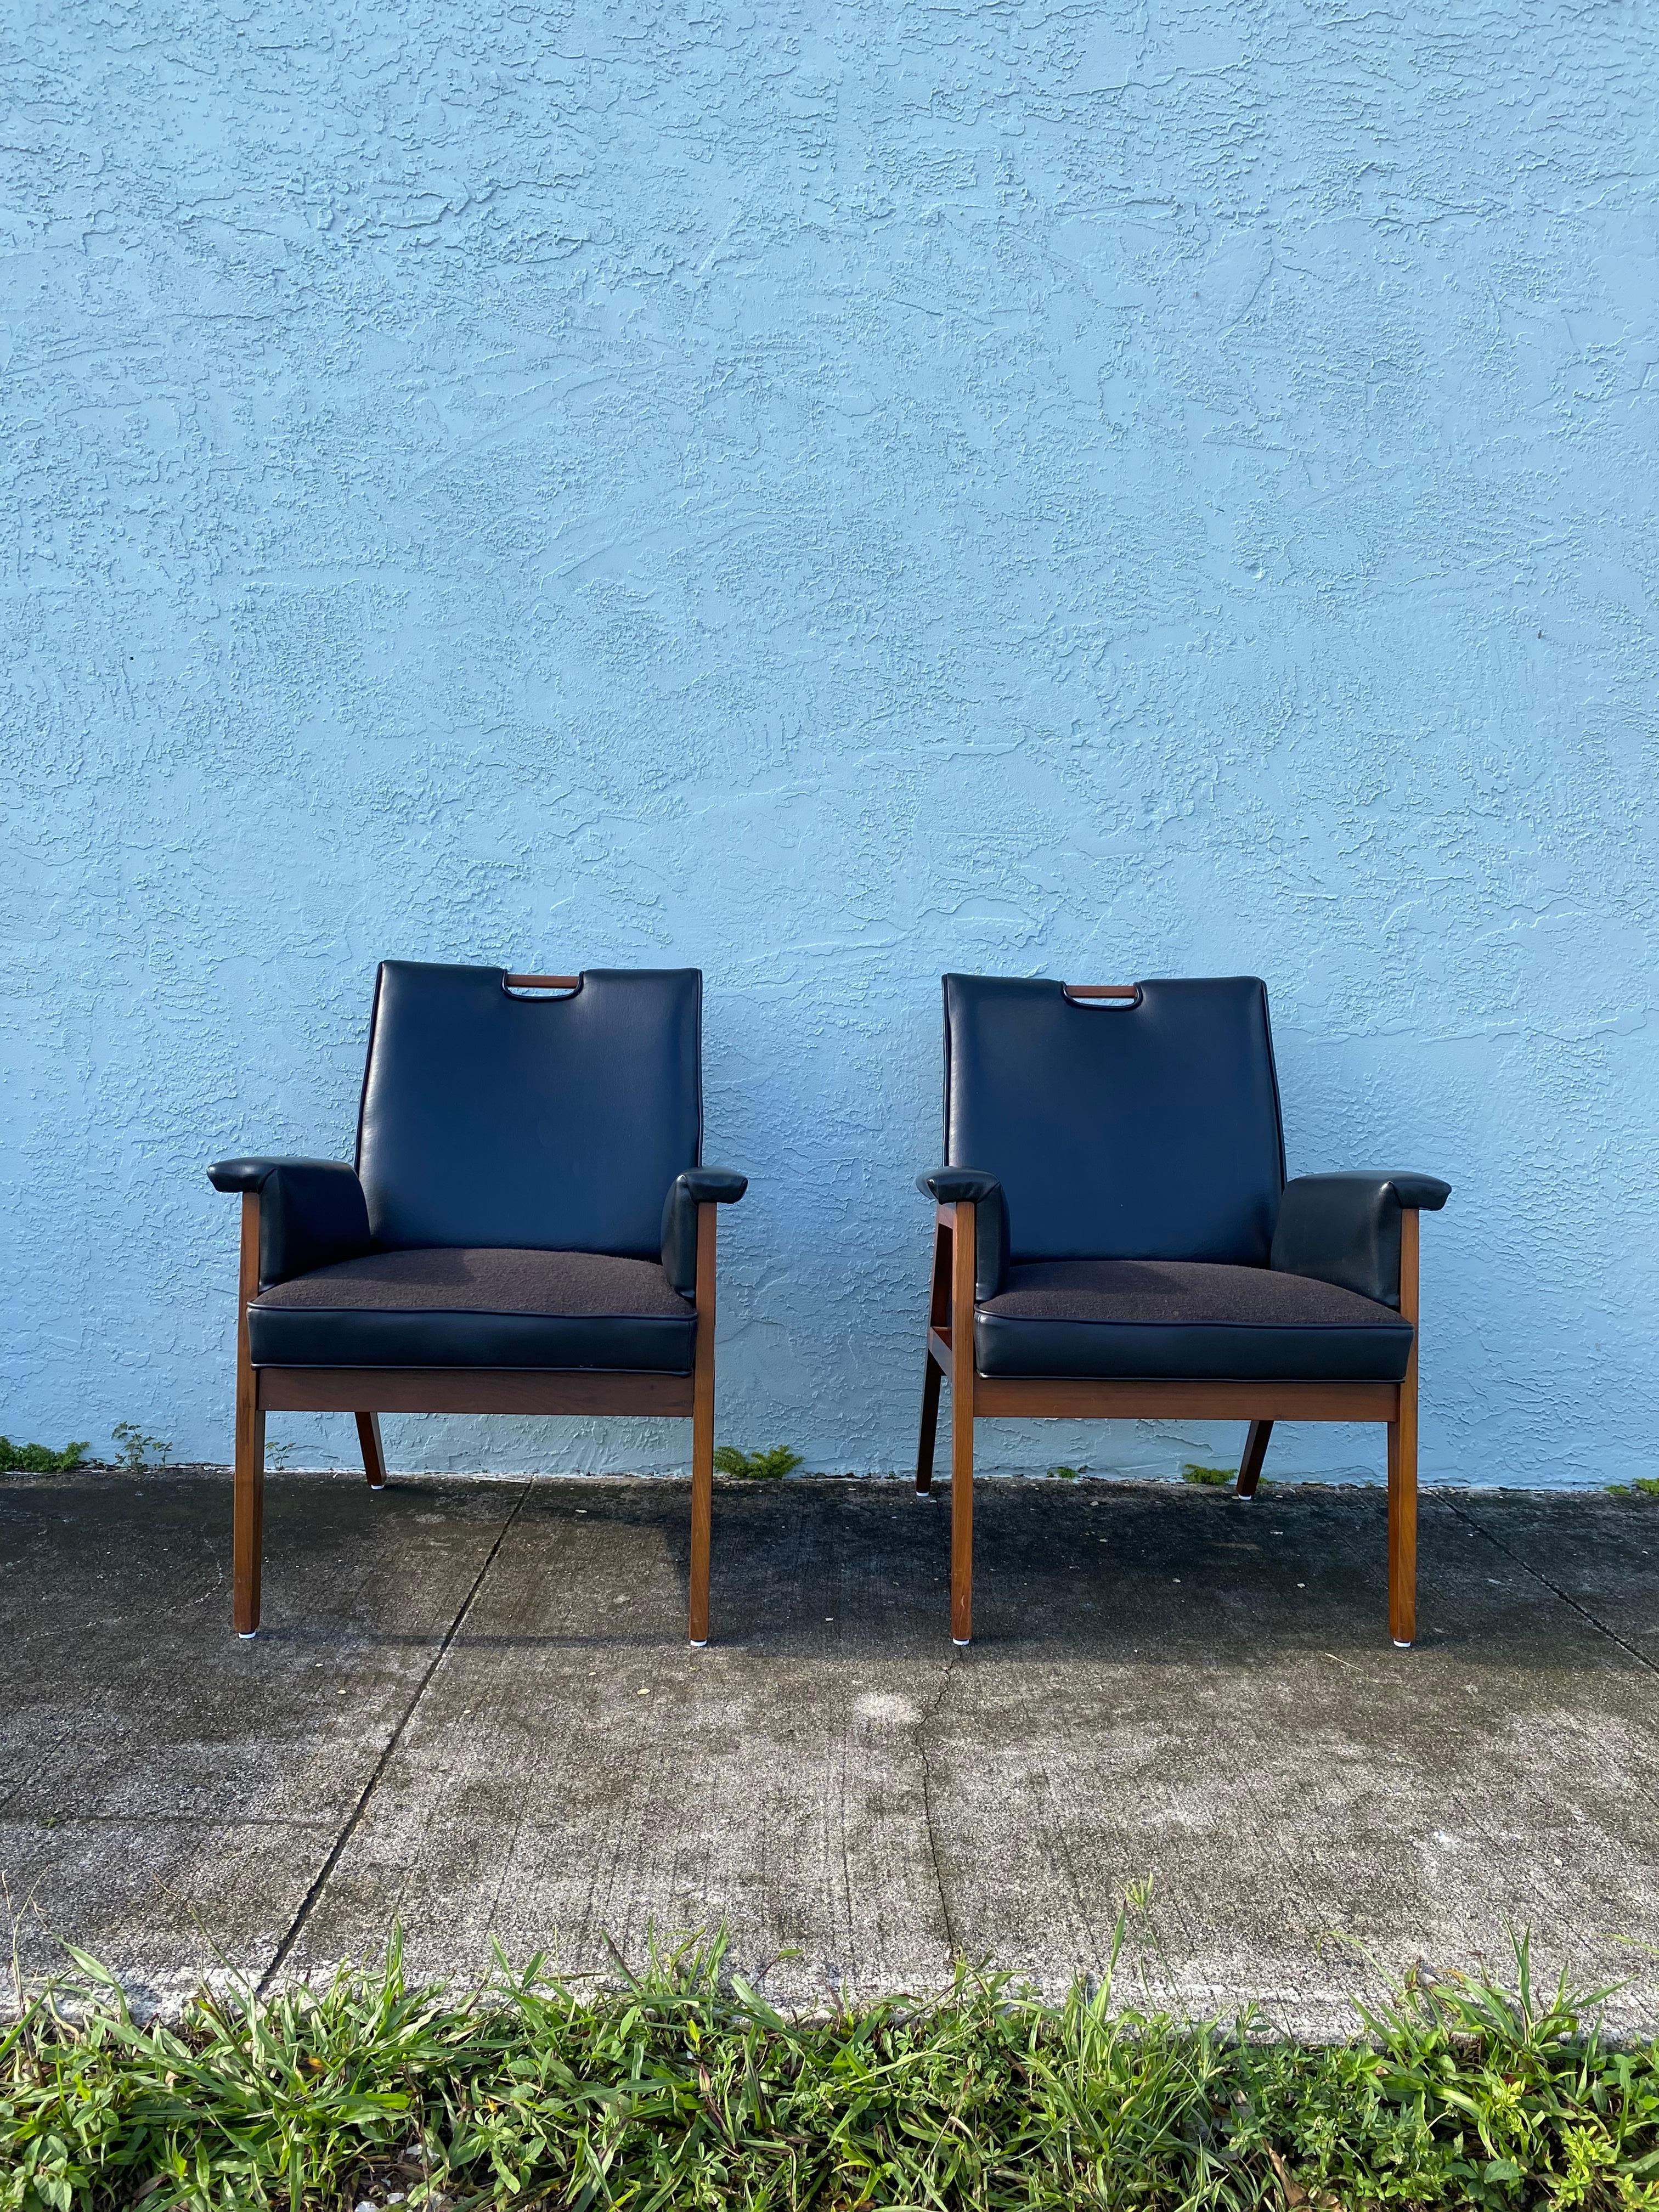 1960s Finn Julh Danish Walnut Leather Sculptural Chairs, Set of 2 For Sale 2